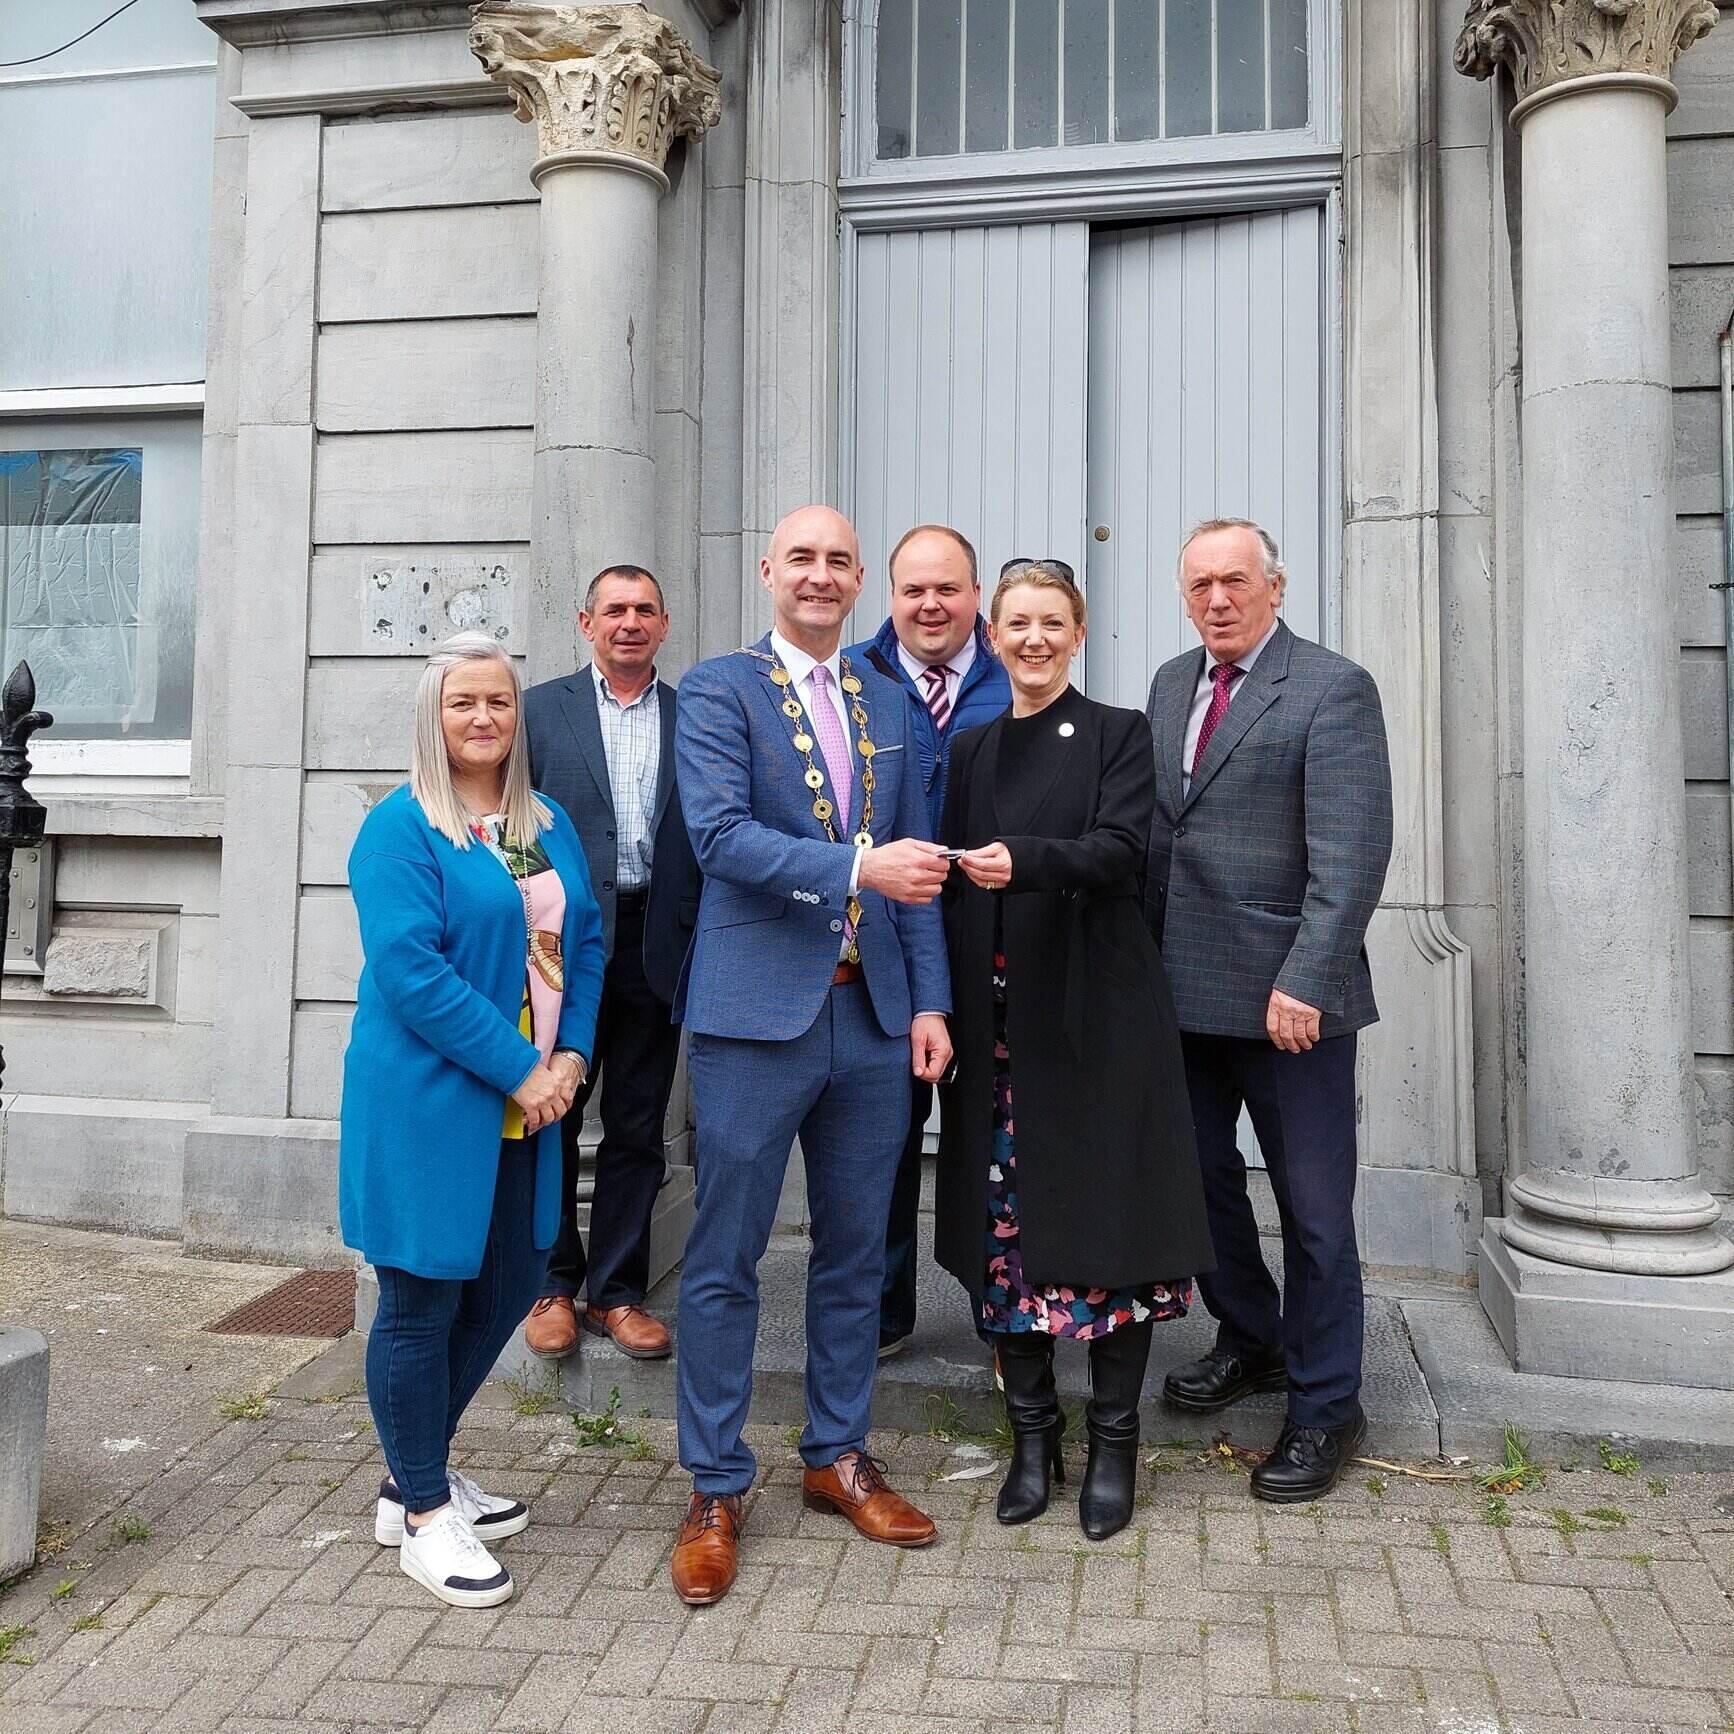 Limerick bank branches - Mayor of Limerick City and County, Cllr Daniel Butler, recently received the keys to the Rathkeale Bank of Ireland building purchased by the Council.